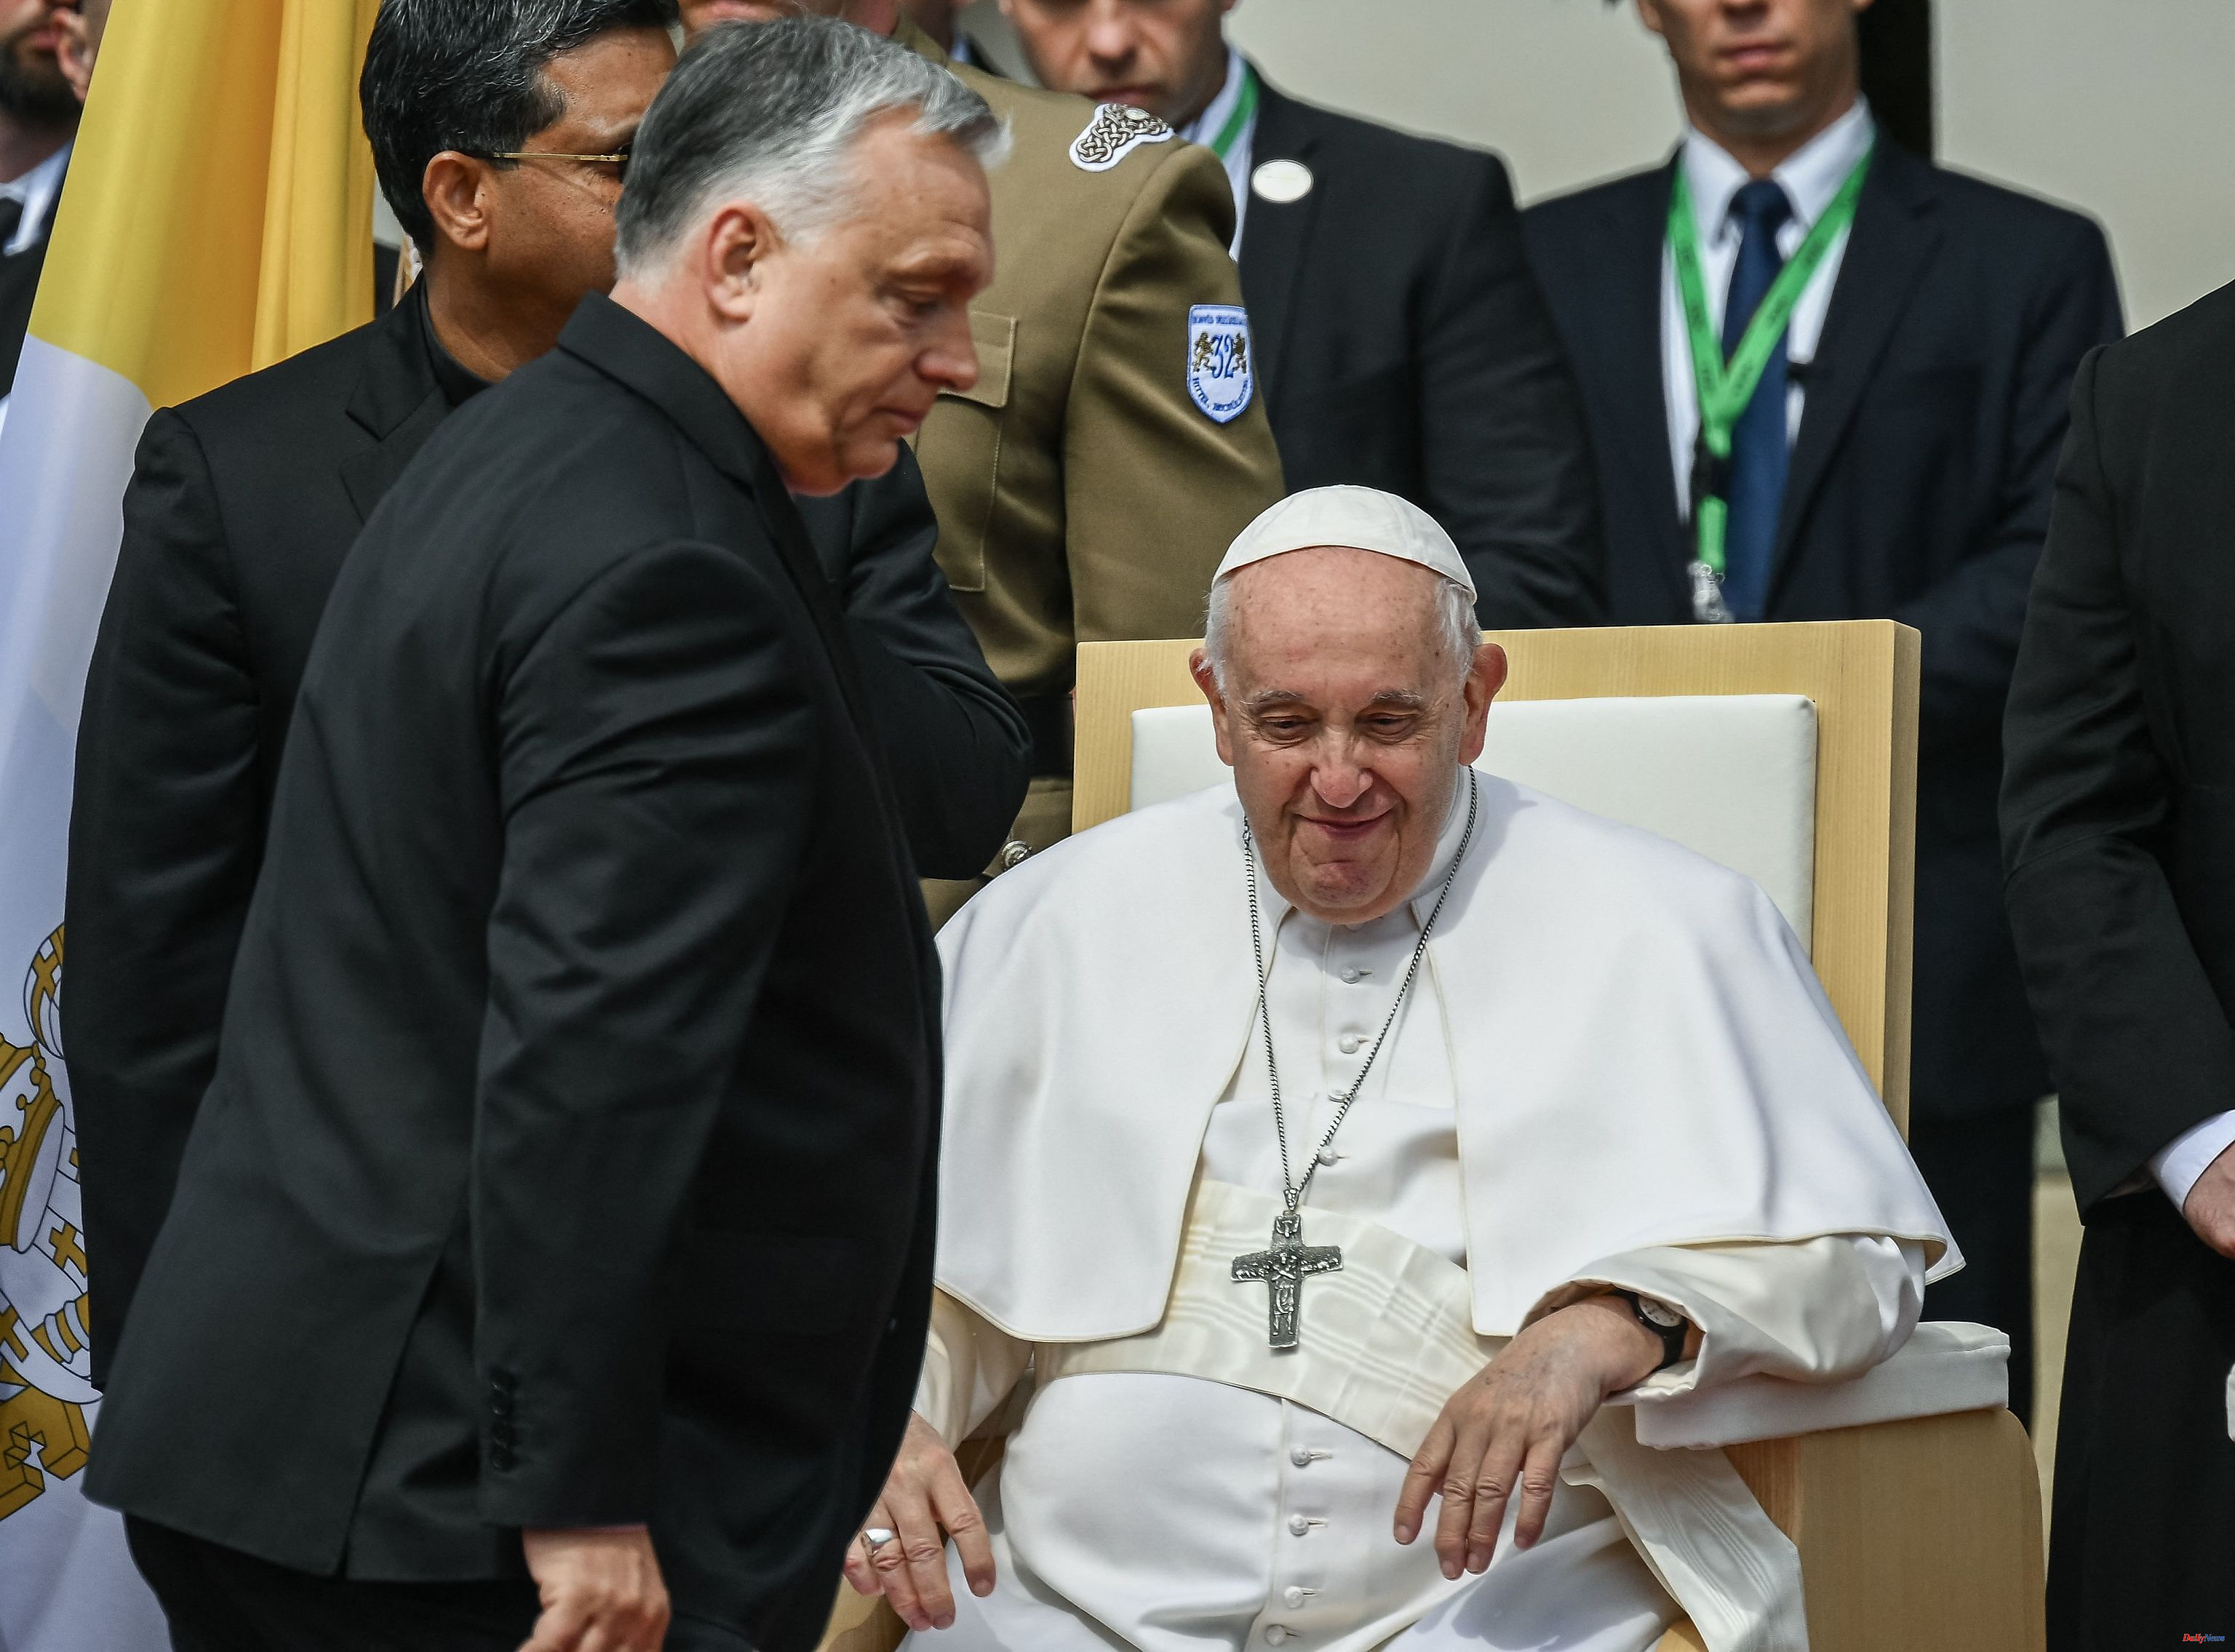 Europe Pope Francis asks Orban for Europe to deal with the migration crisis "without excuses"